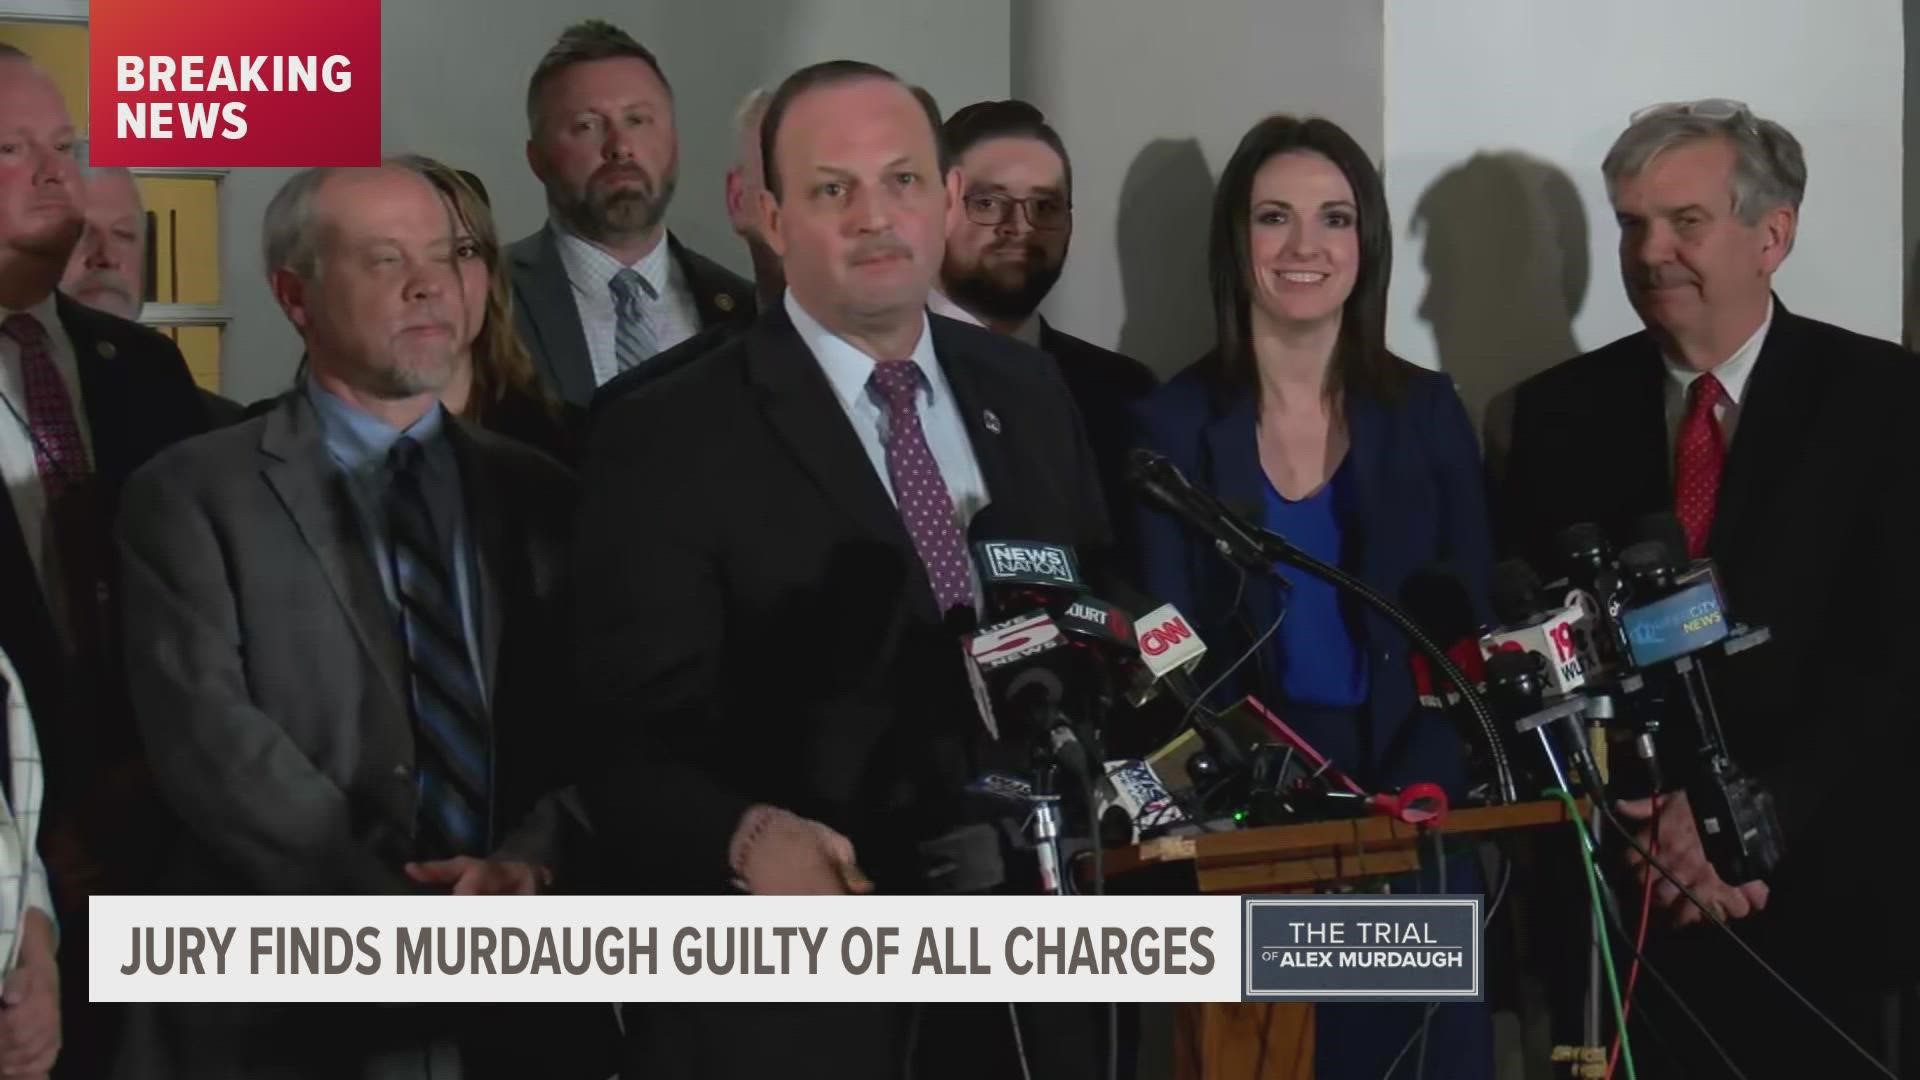 The prosecution team reacts to the news that Alex Murdaugh found guilty.